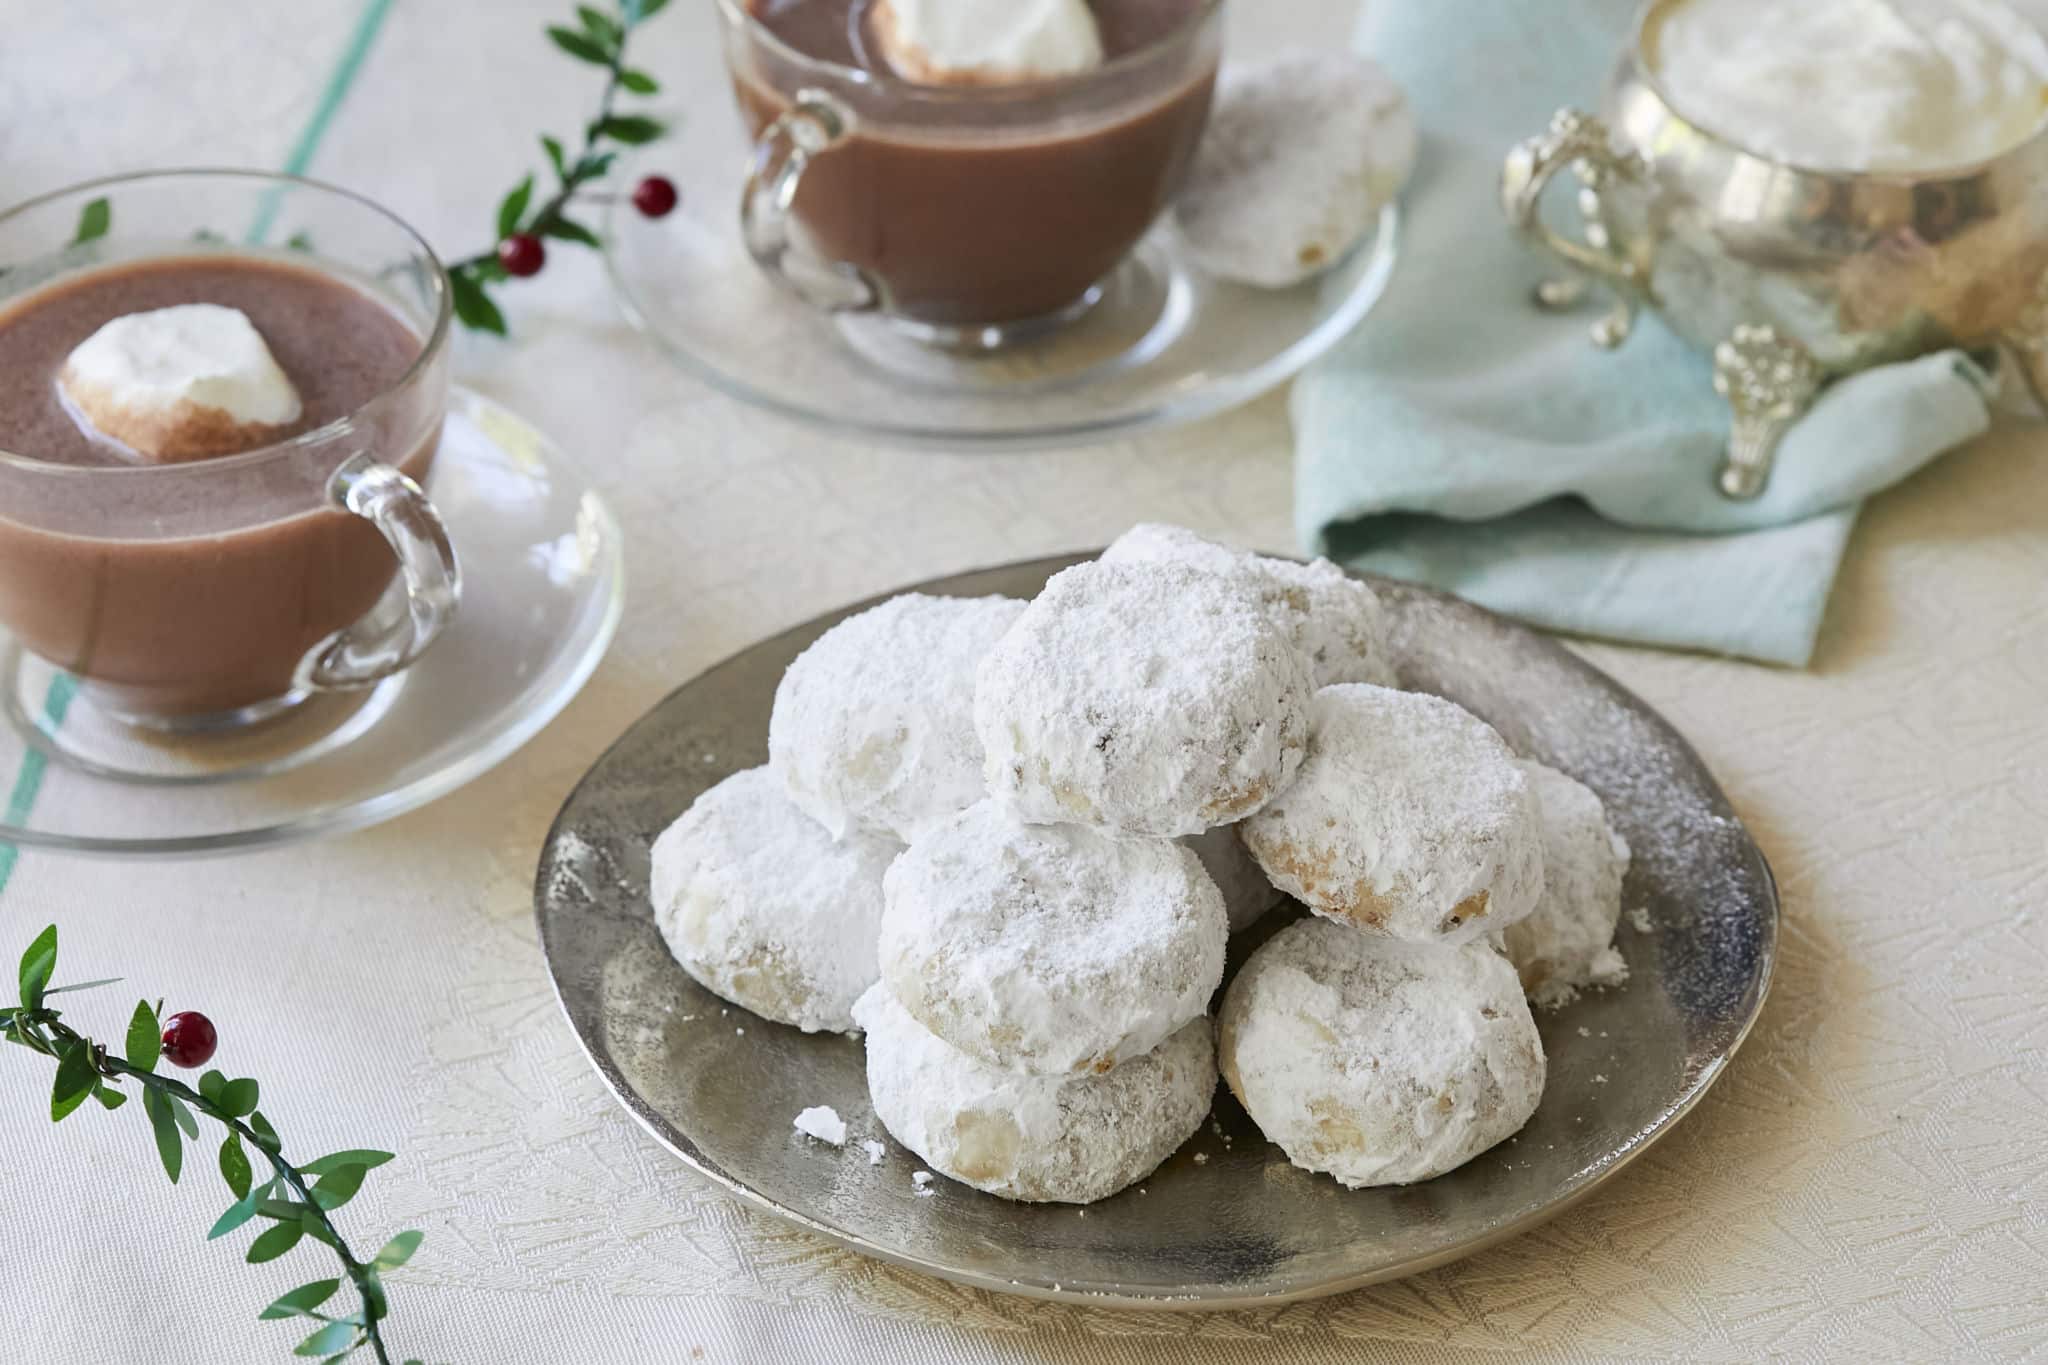 Homemade Greek Kourabiedes are presented on a silver plate next to two clear mugs of hot chocolate topped with marshmallows. The Kourabiedes are coated in powdered sugar.